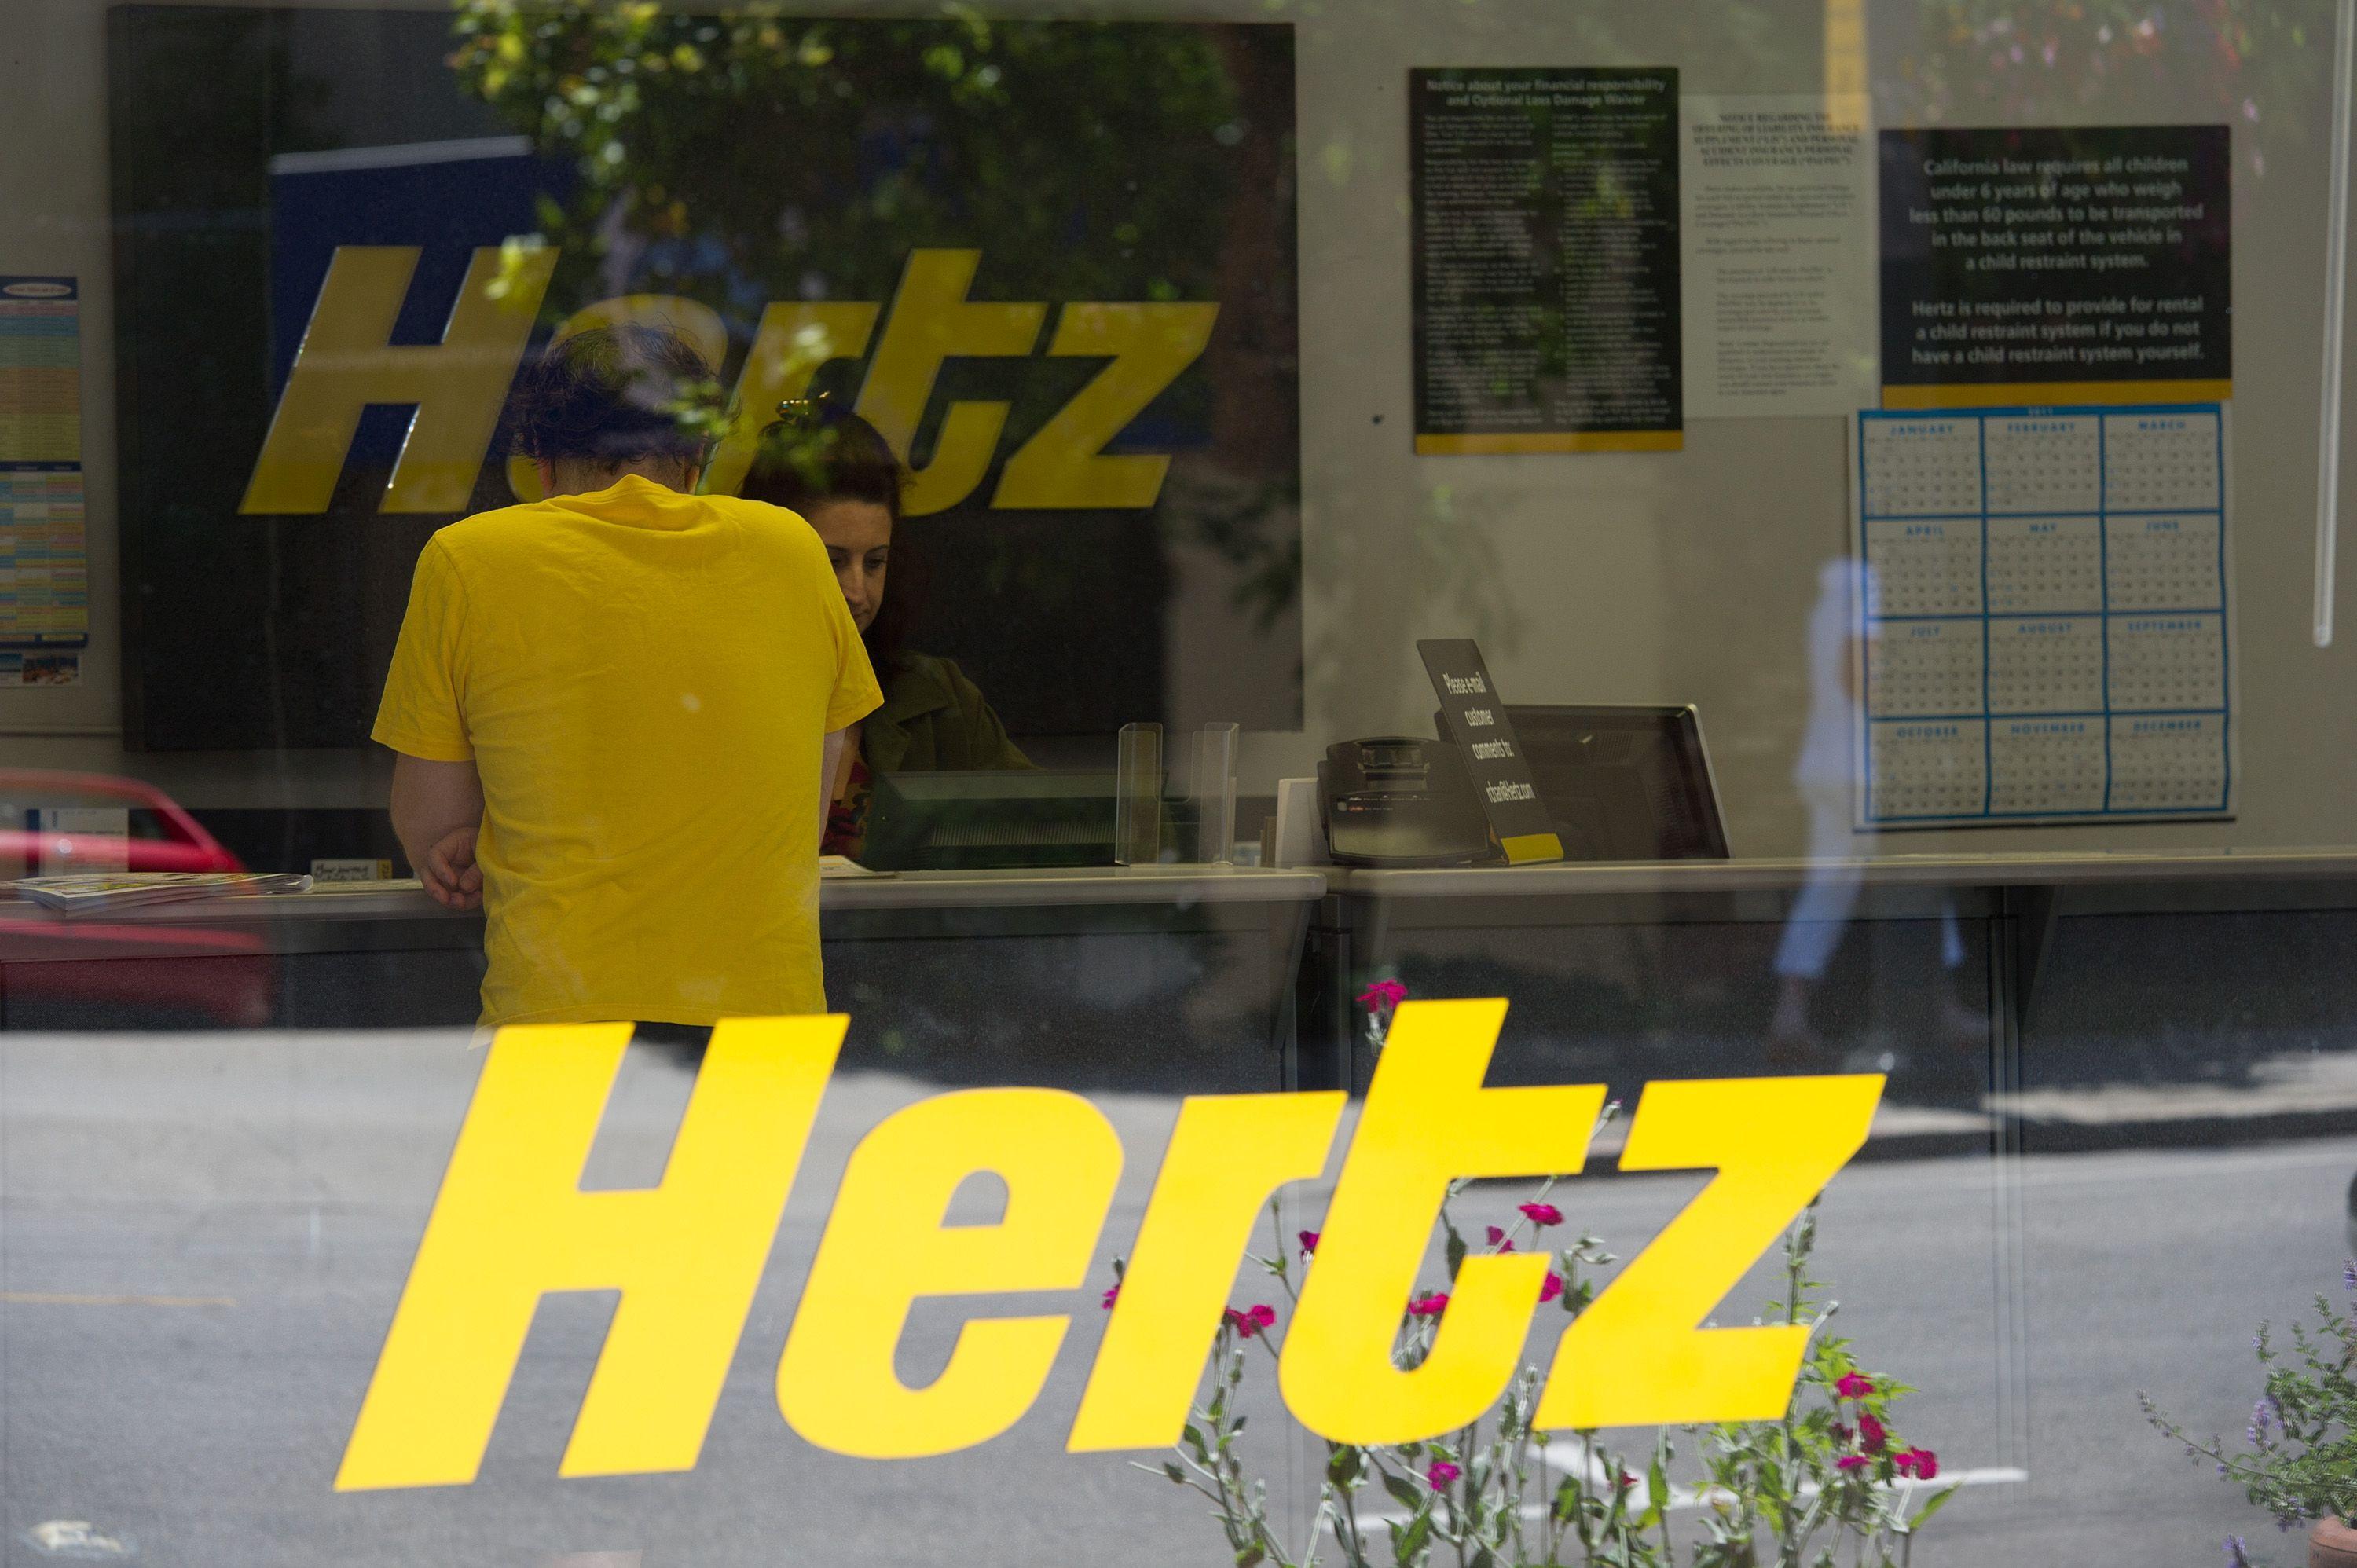 Hertz Corporation Logo - Rental Car Giant Hertz Just Inked a Deal With Uber and Lyft